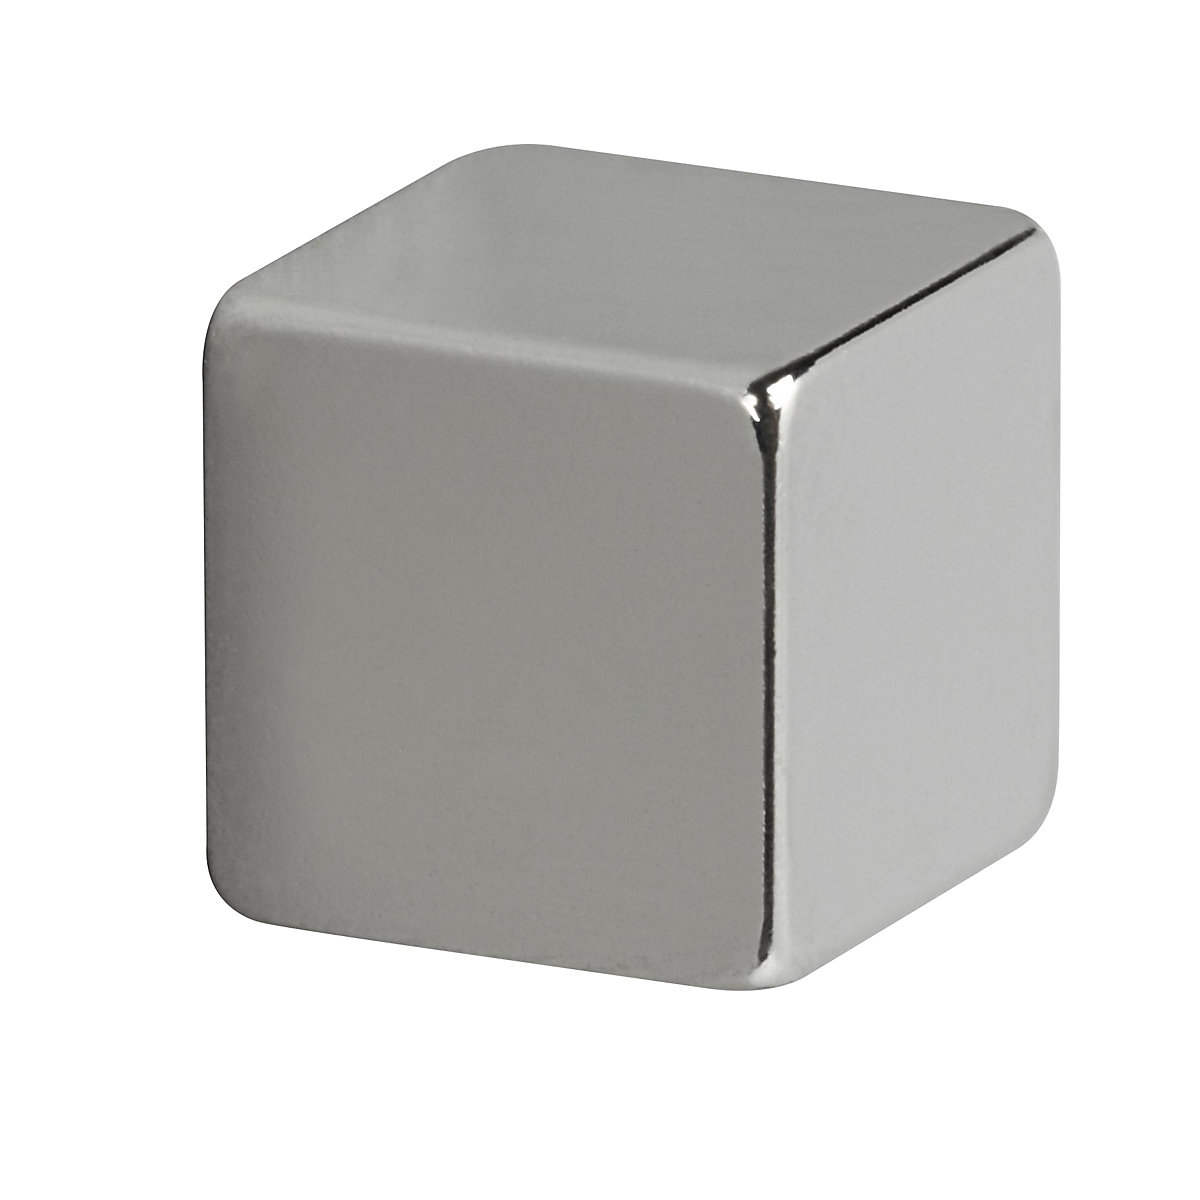 Neodymium cube magnet – MAUL, nickel plated, holds 3.8 kg, pack of 20-4